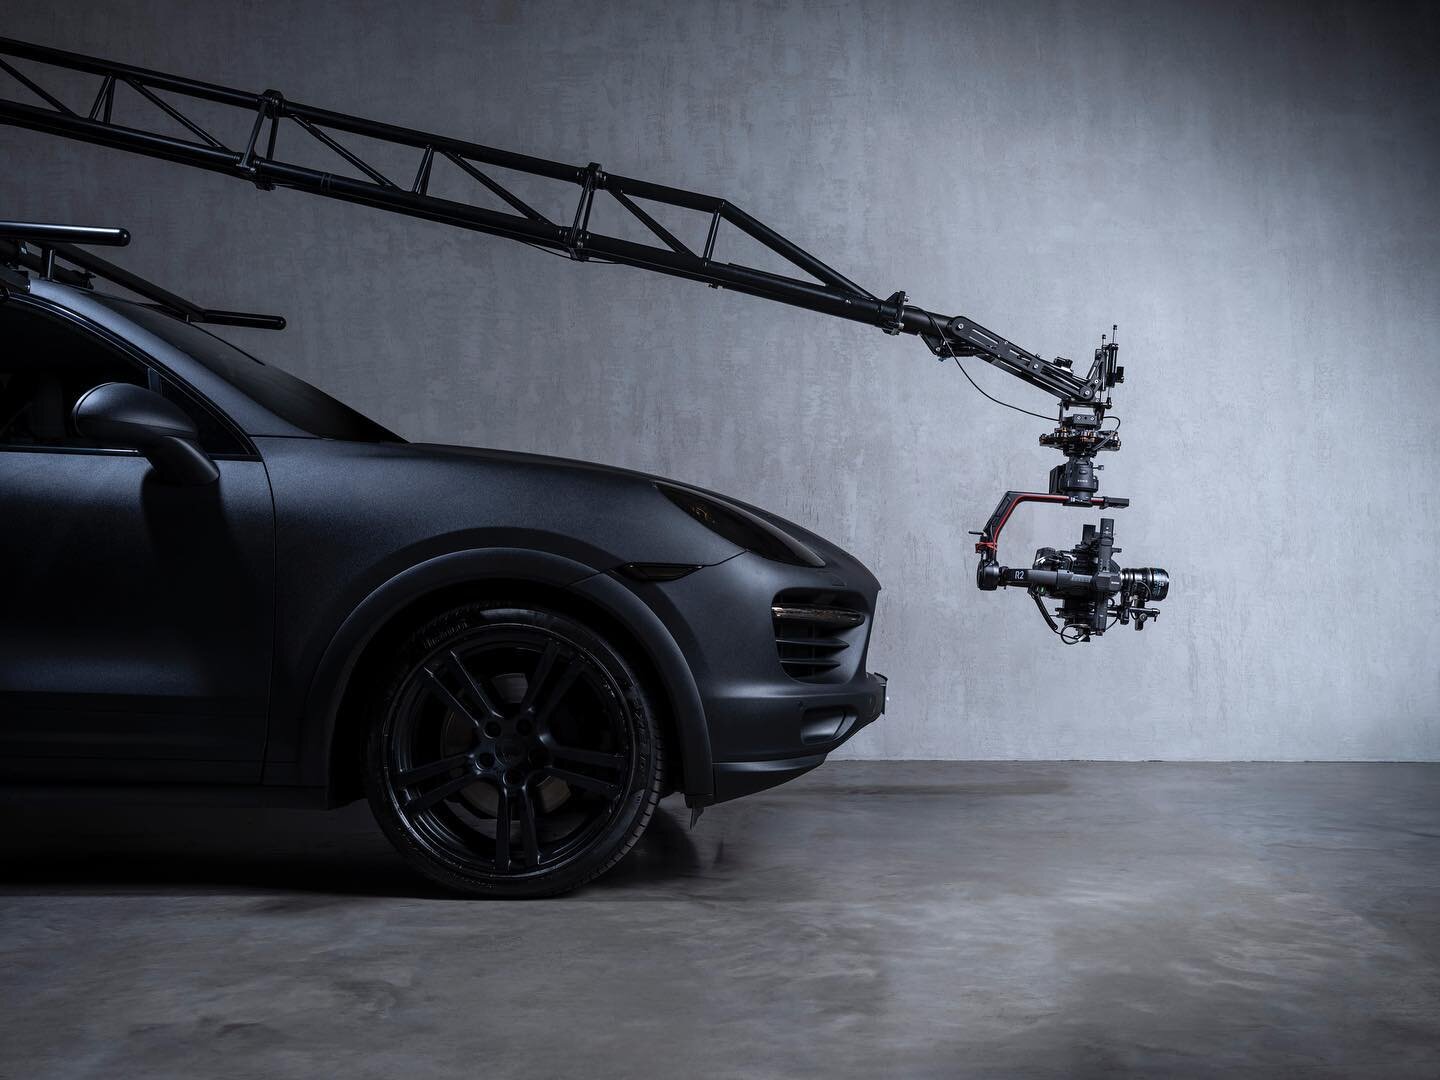 Our Motocrane Ultra Arm 🖤🎥 paired with our Porsche Cayenne, this is a beast! 🤘🕹🎬🏎